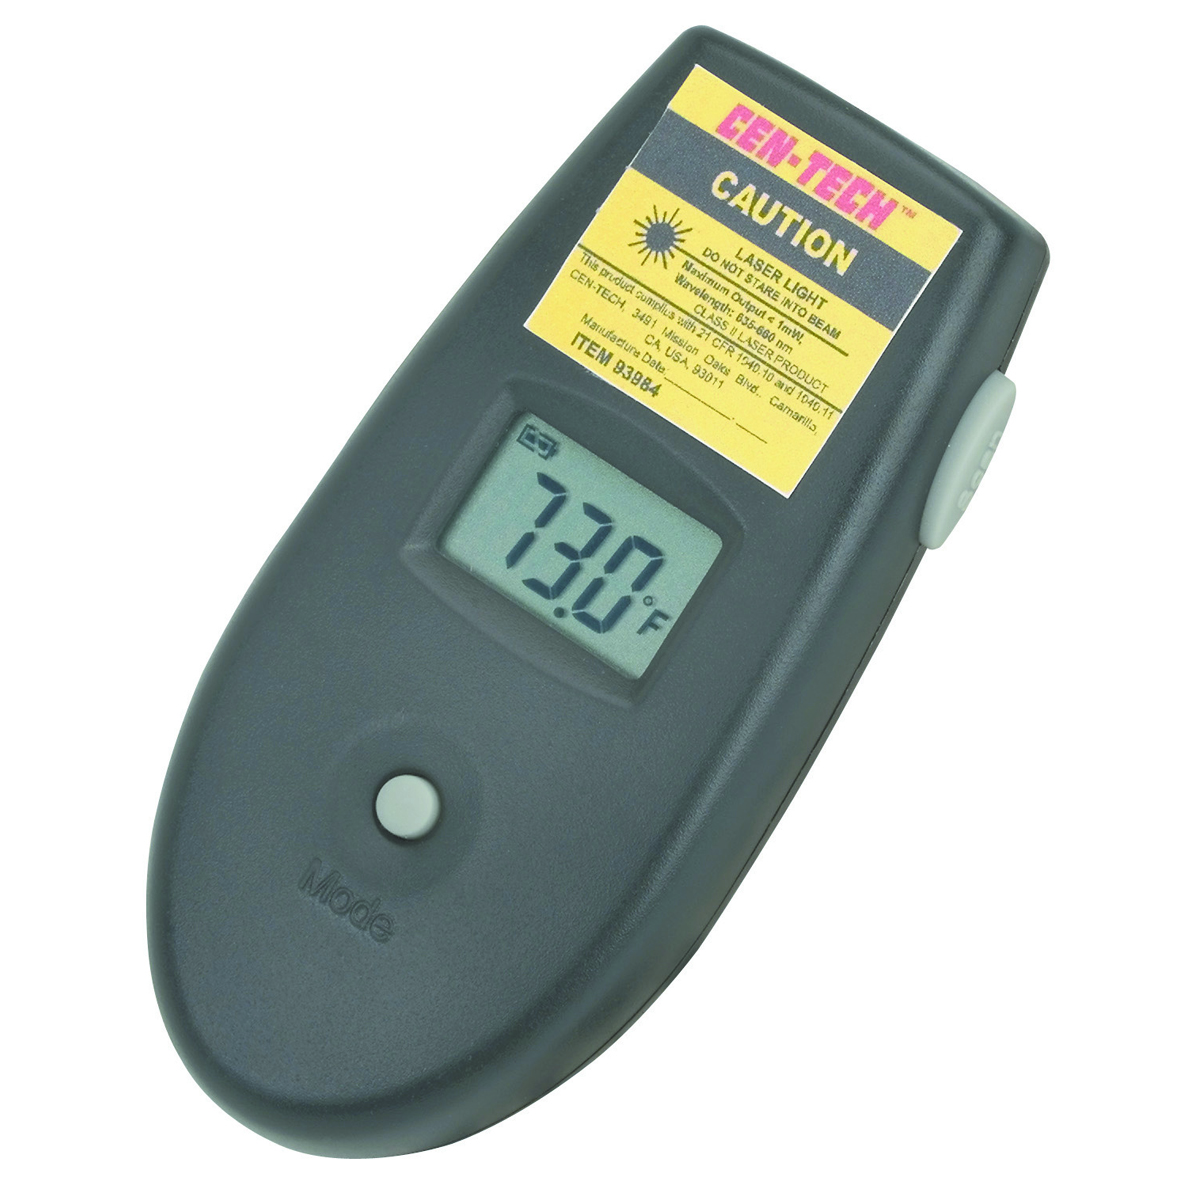 PITTSBURGH Infrared Laser Thermometer - Item 93984